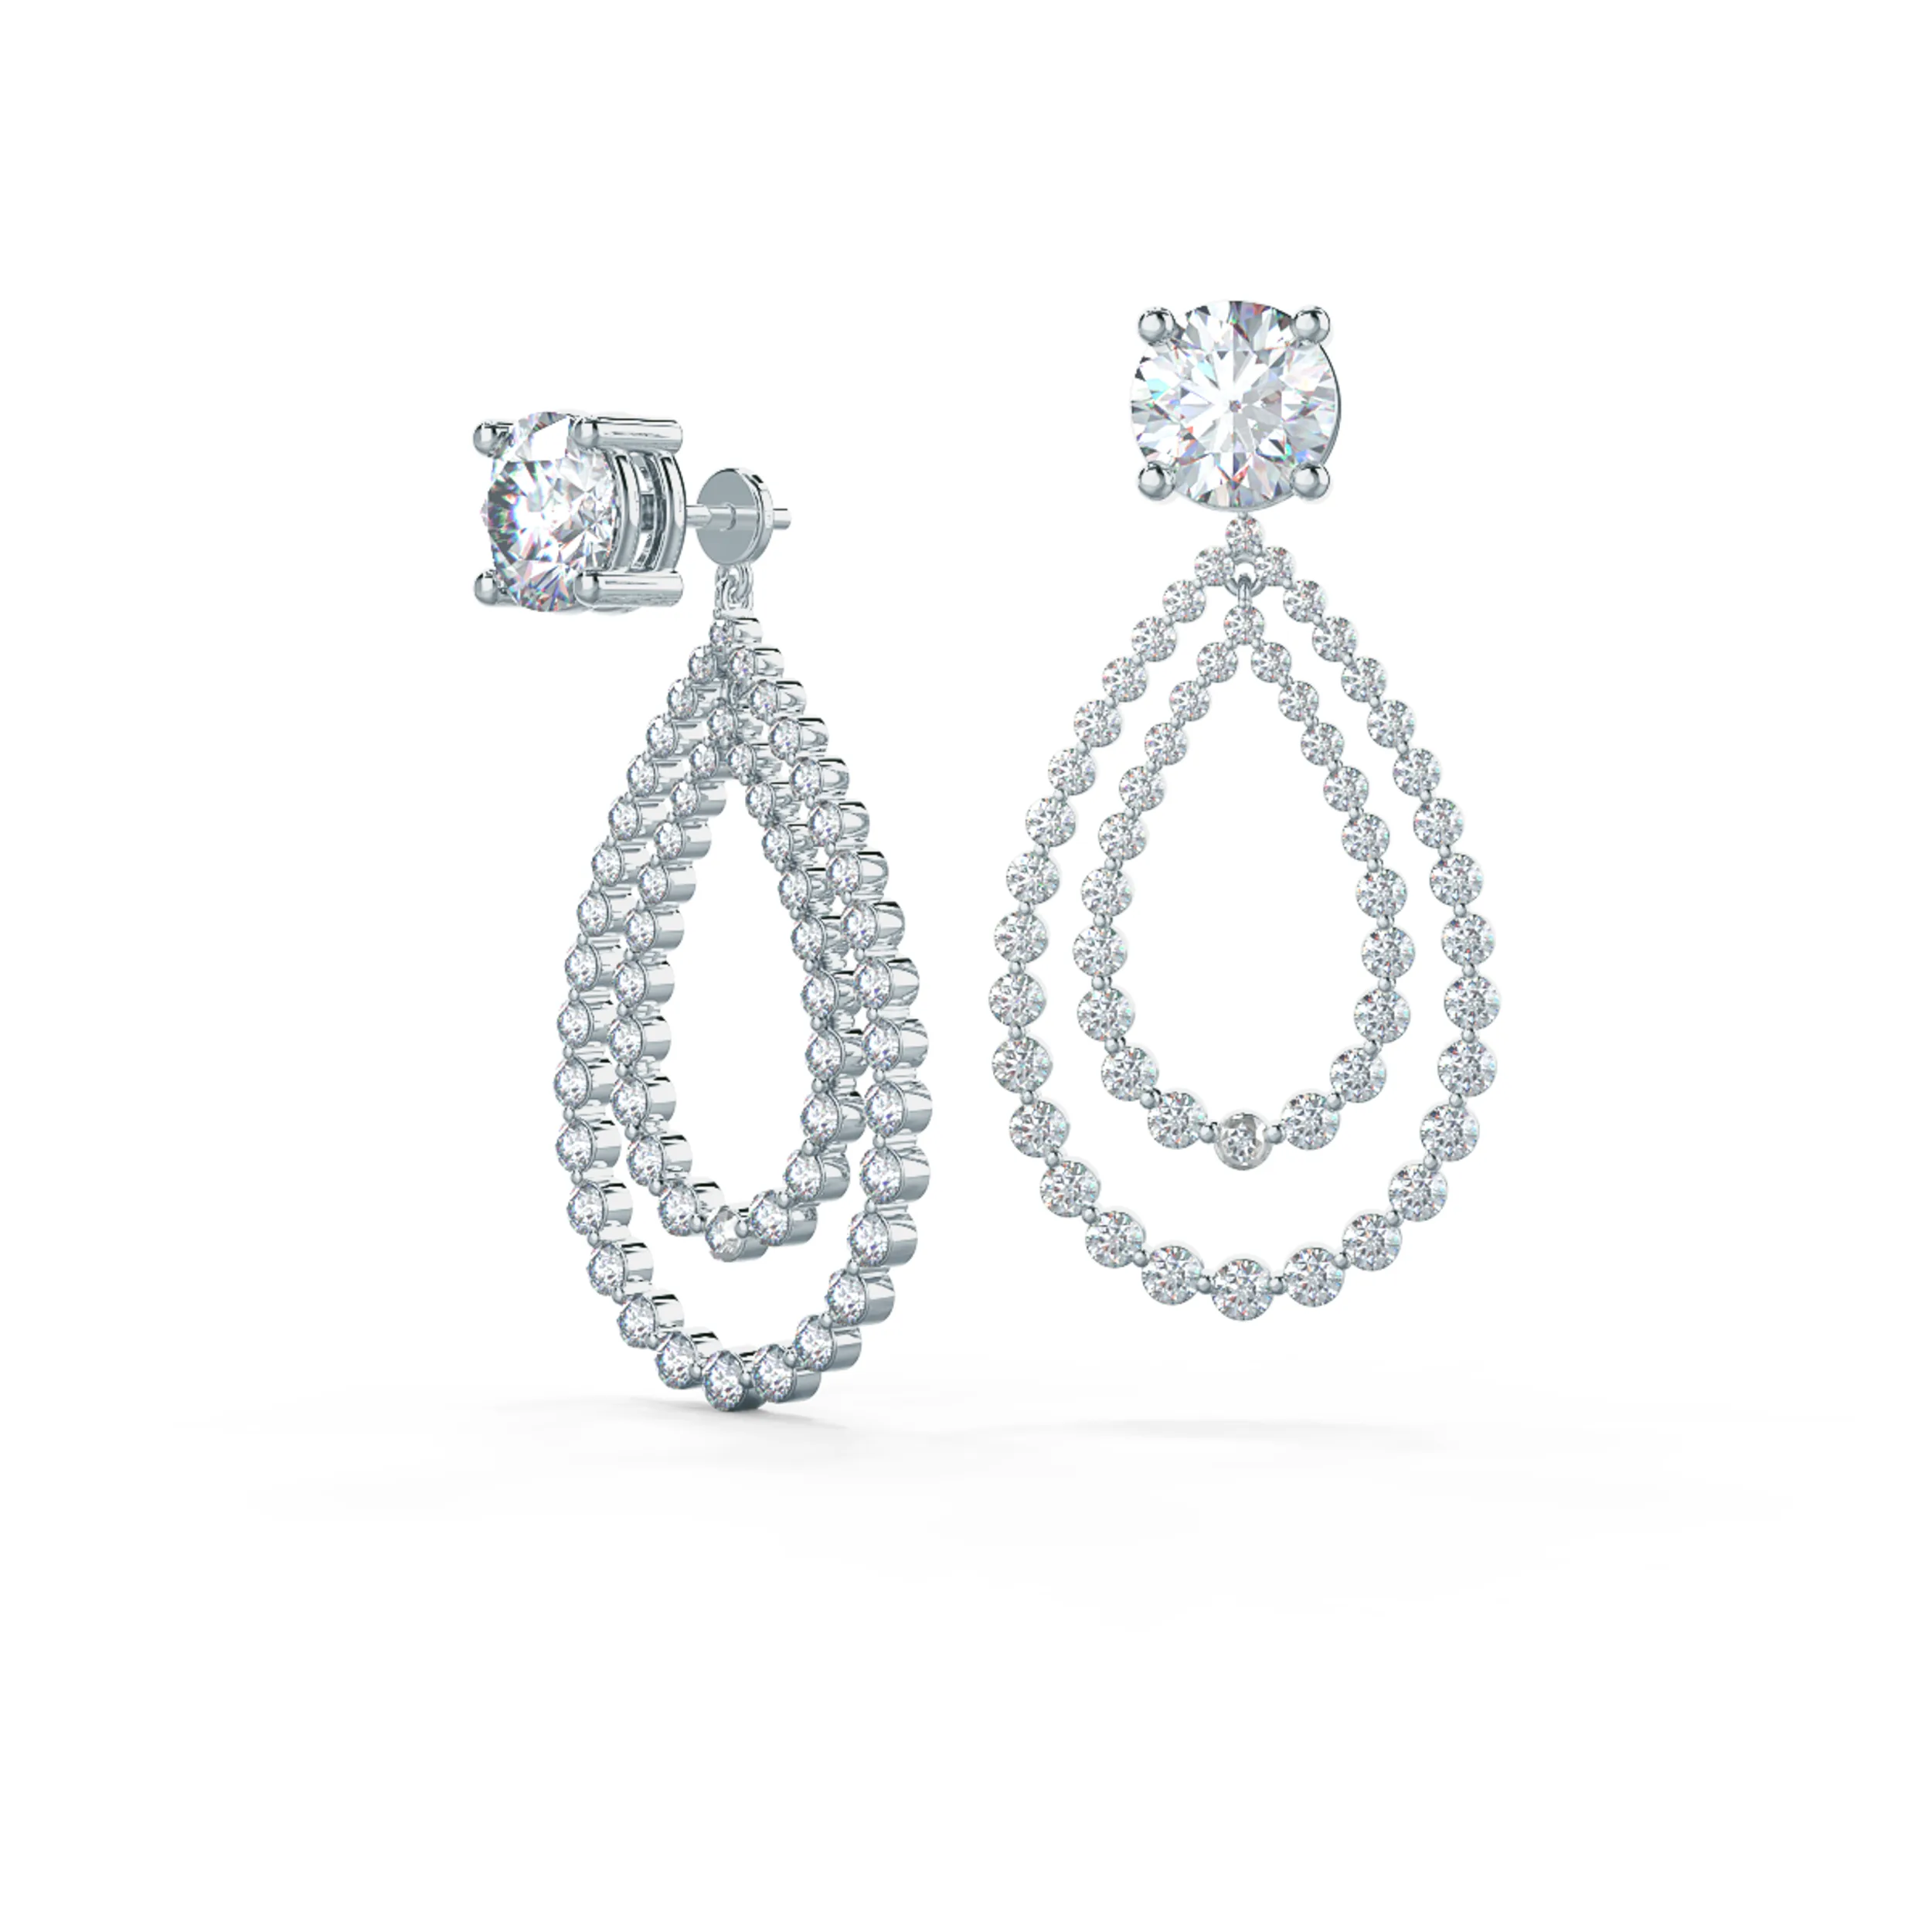 Round Brilliant Lab Diamonds set in 18k White Gold Double Open Pear Earring Jackets ()